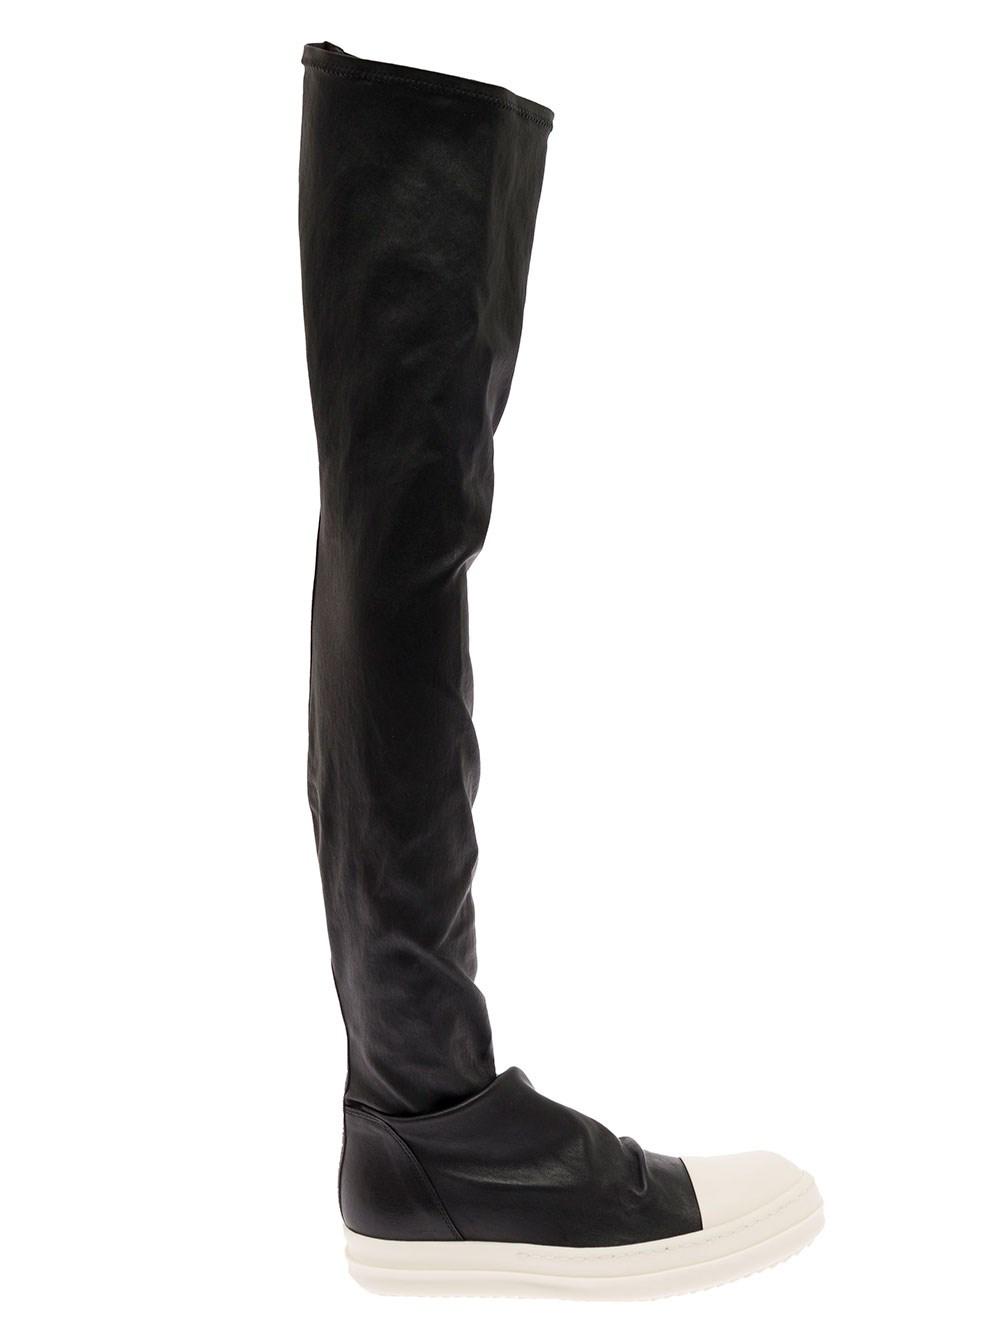 Rick Owens Woman's Stocking Sneak Leather Boots in Black | Lyst